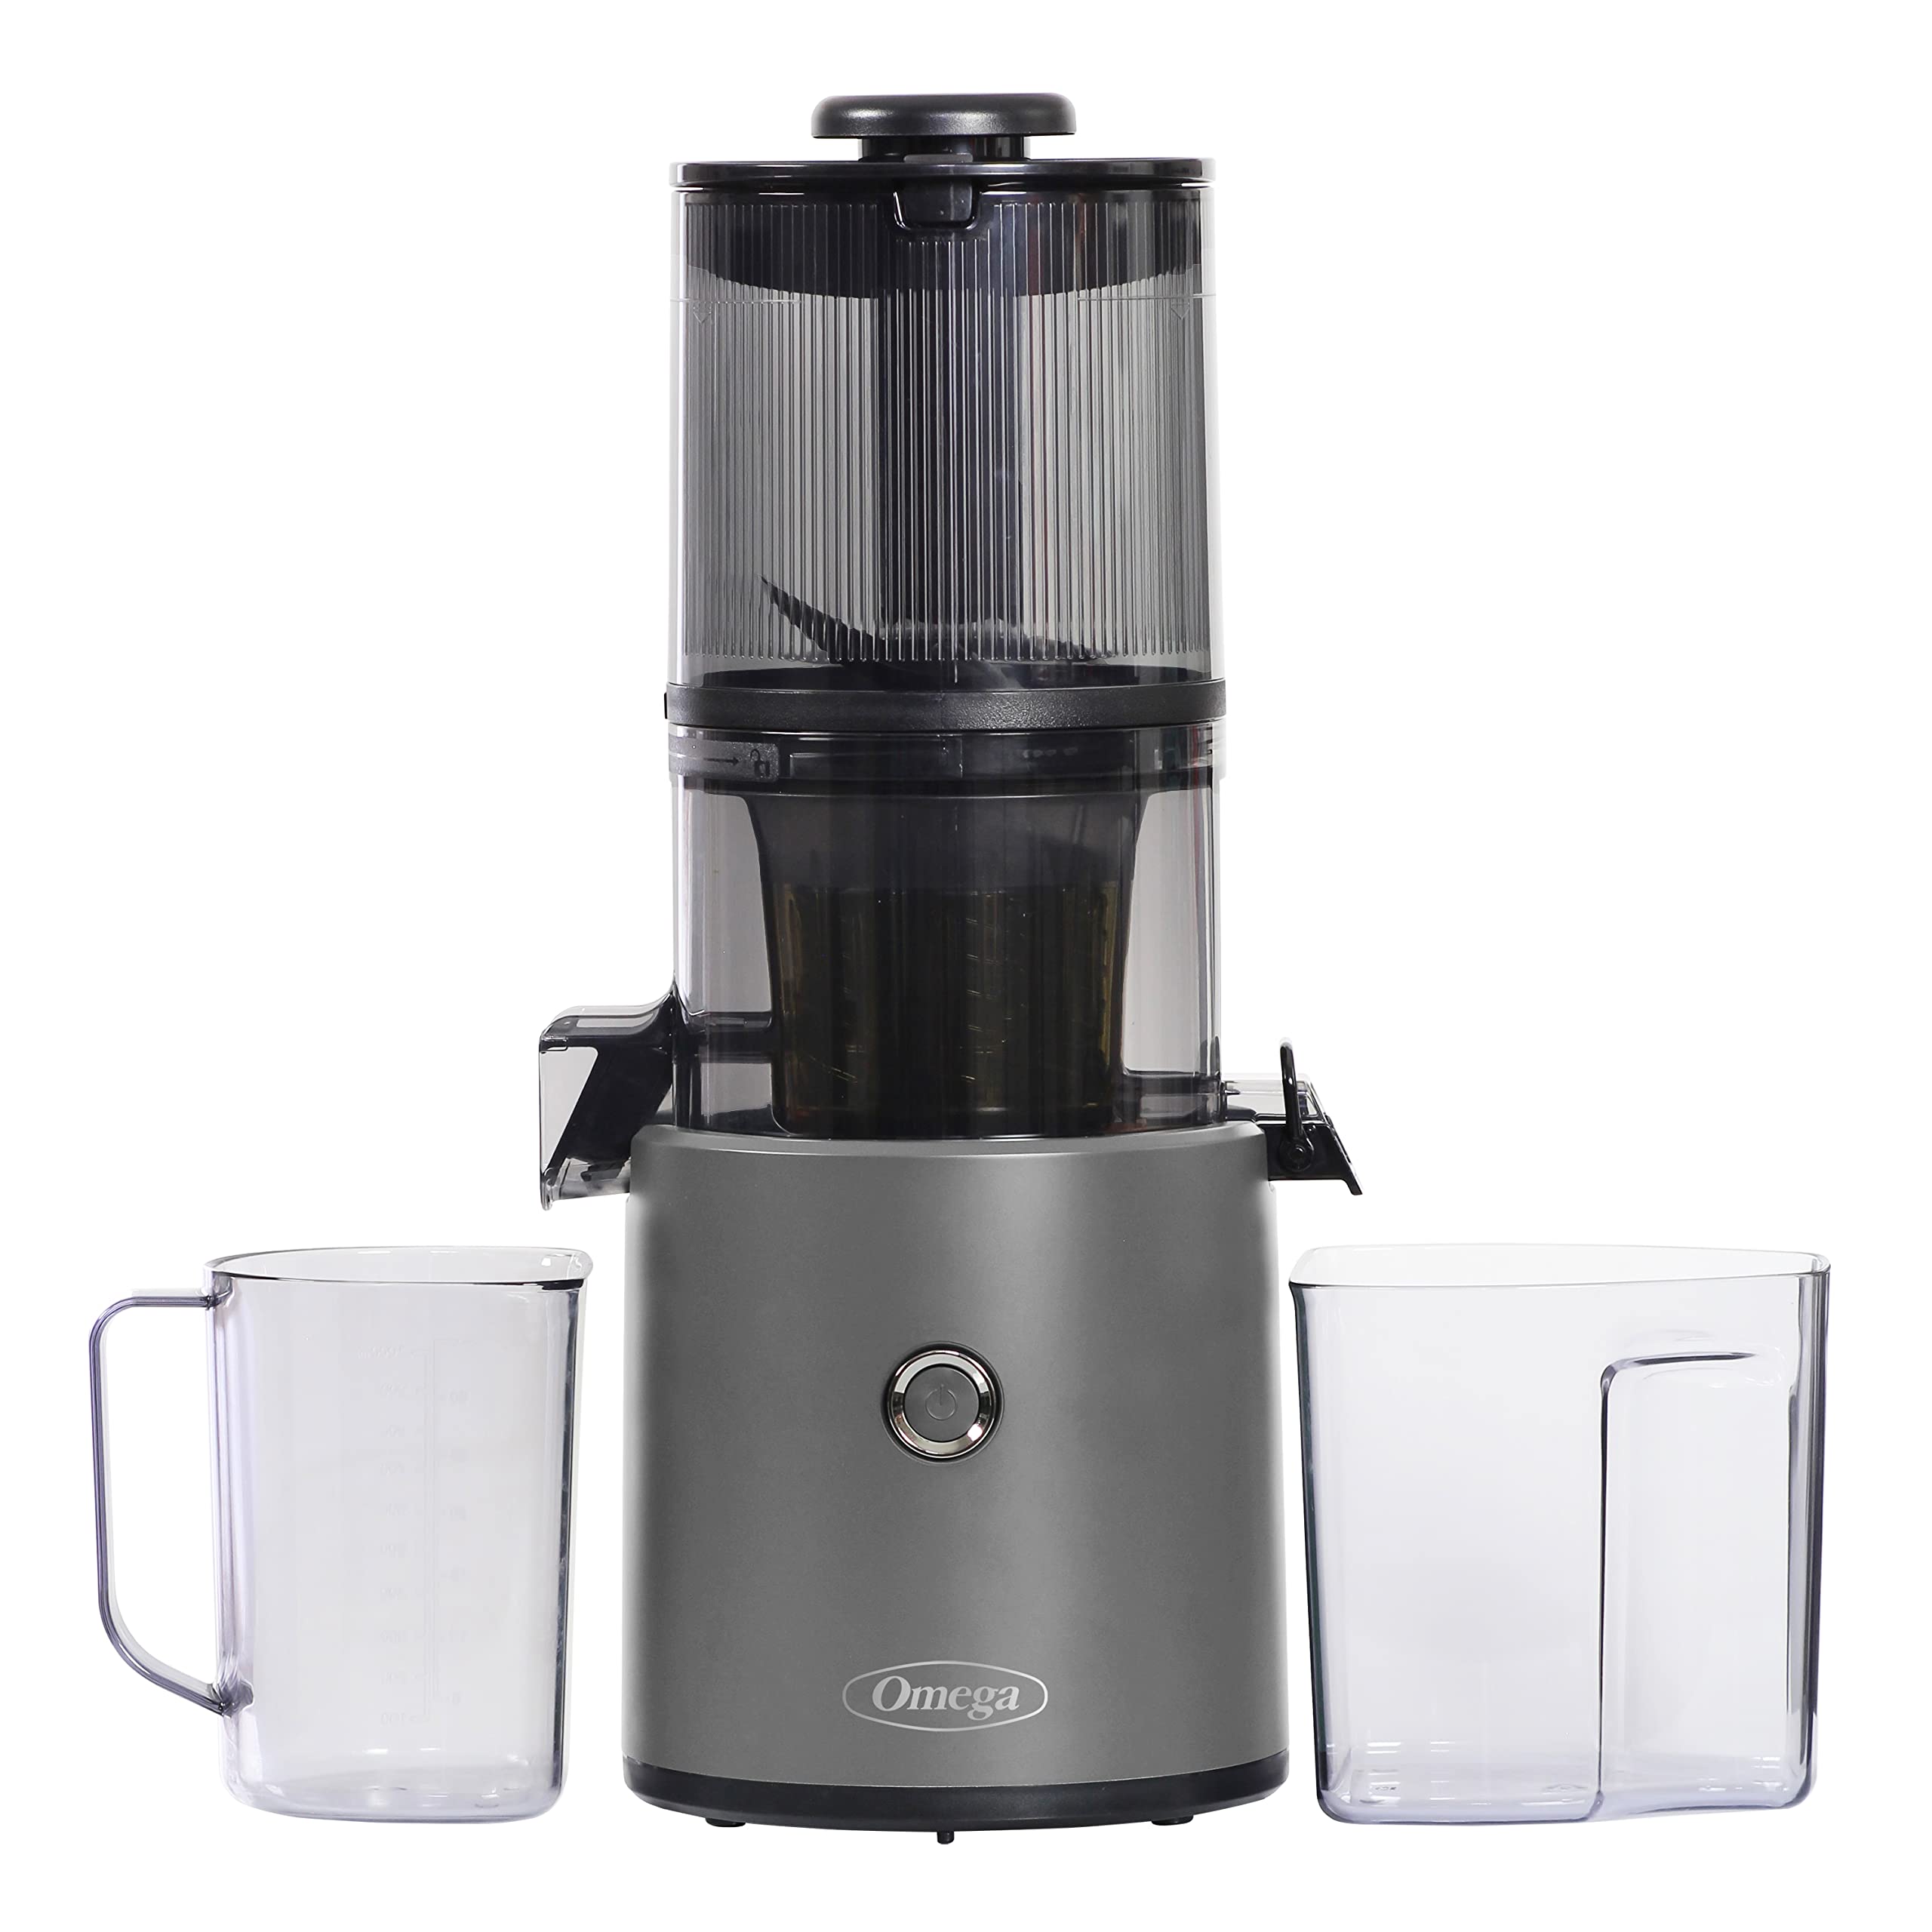 Omega Juicer JC2022GY11 Slow Masticating Cold Press Vegetable and Fruit Juice Extractor Effortless Series for Batch Juicing with Extra Large Hopper for No-Prep, 68-Ounce Capacity, 150-Watts, Gray